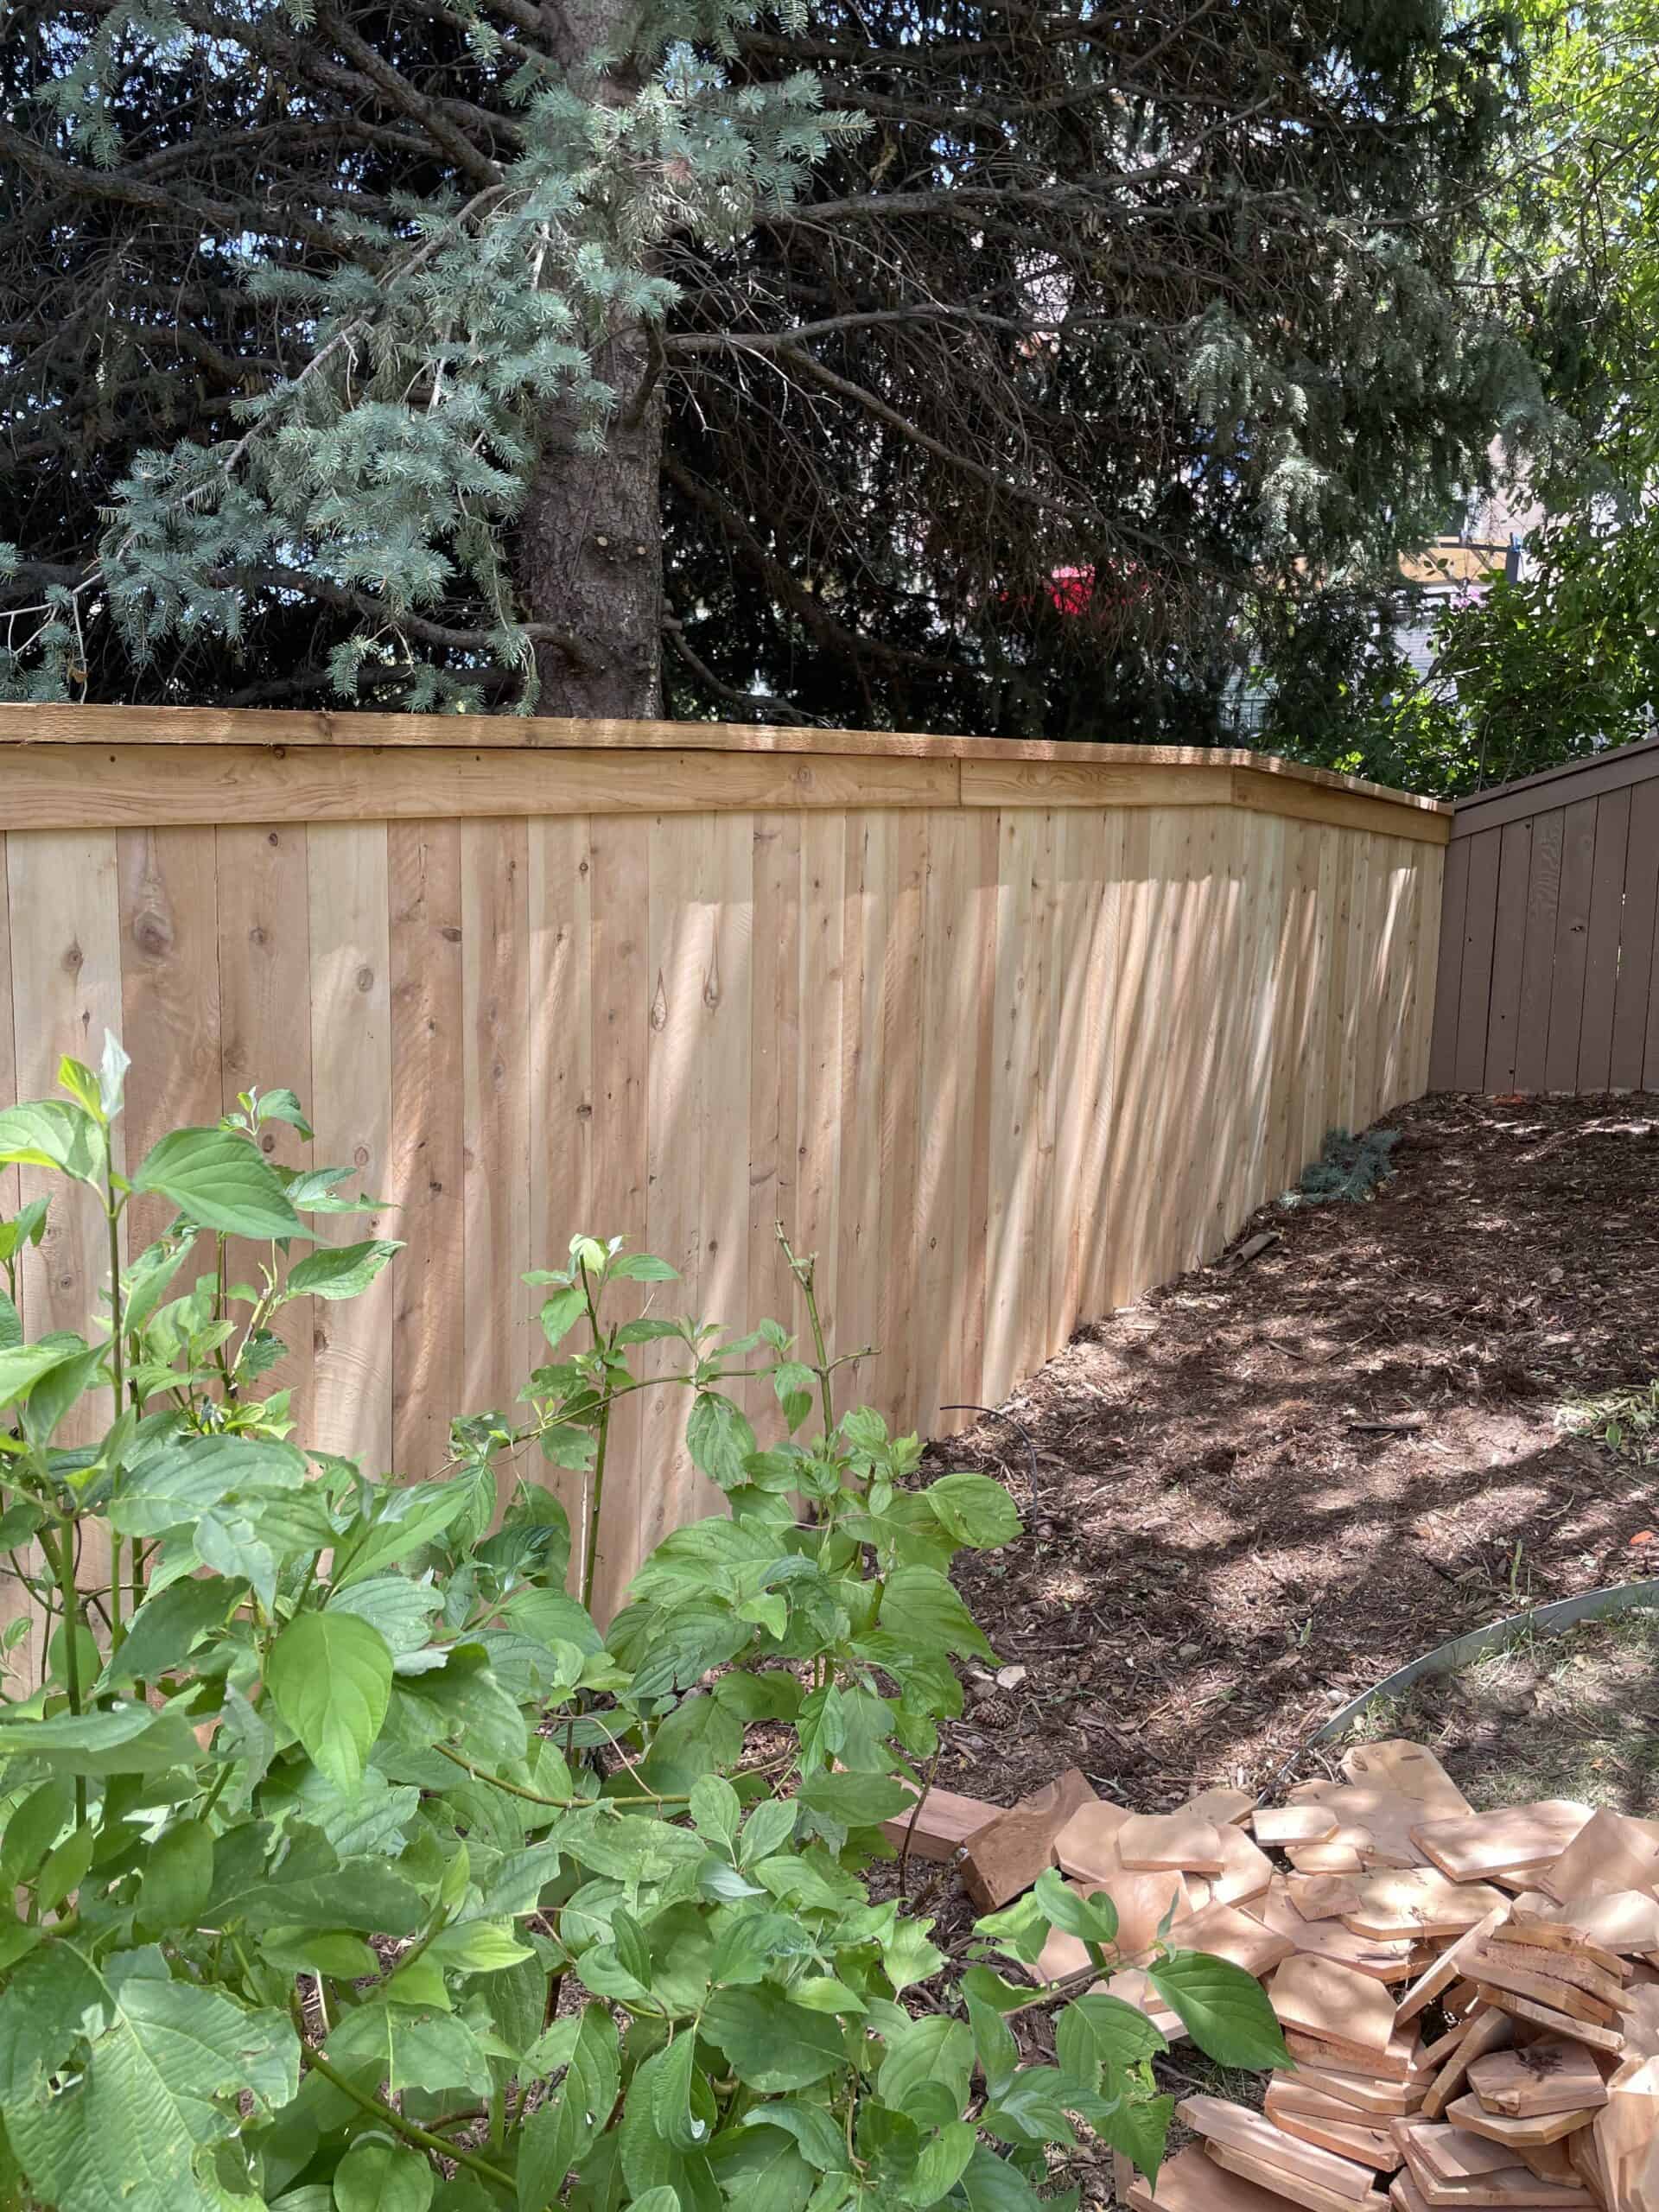 Wood Fencing Services: House Heroes Co specializes in expert installation, repairs, and enhancements, ensuring durable, high-quality fencing solutions.